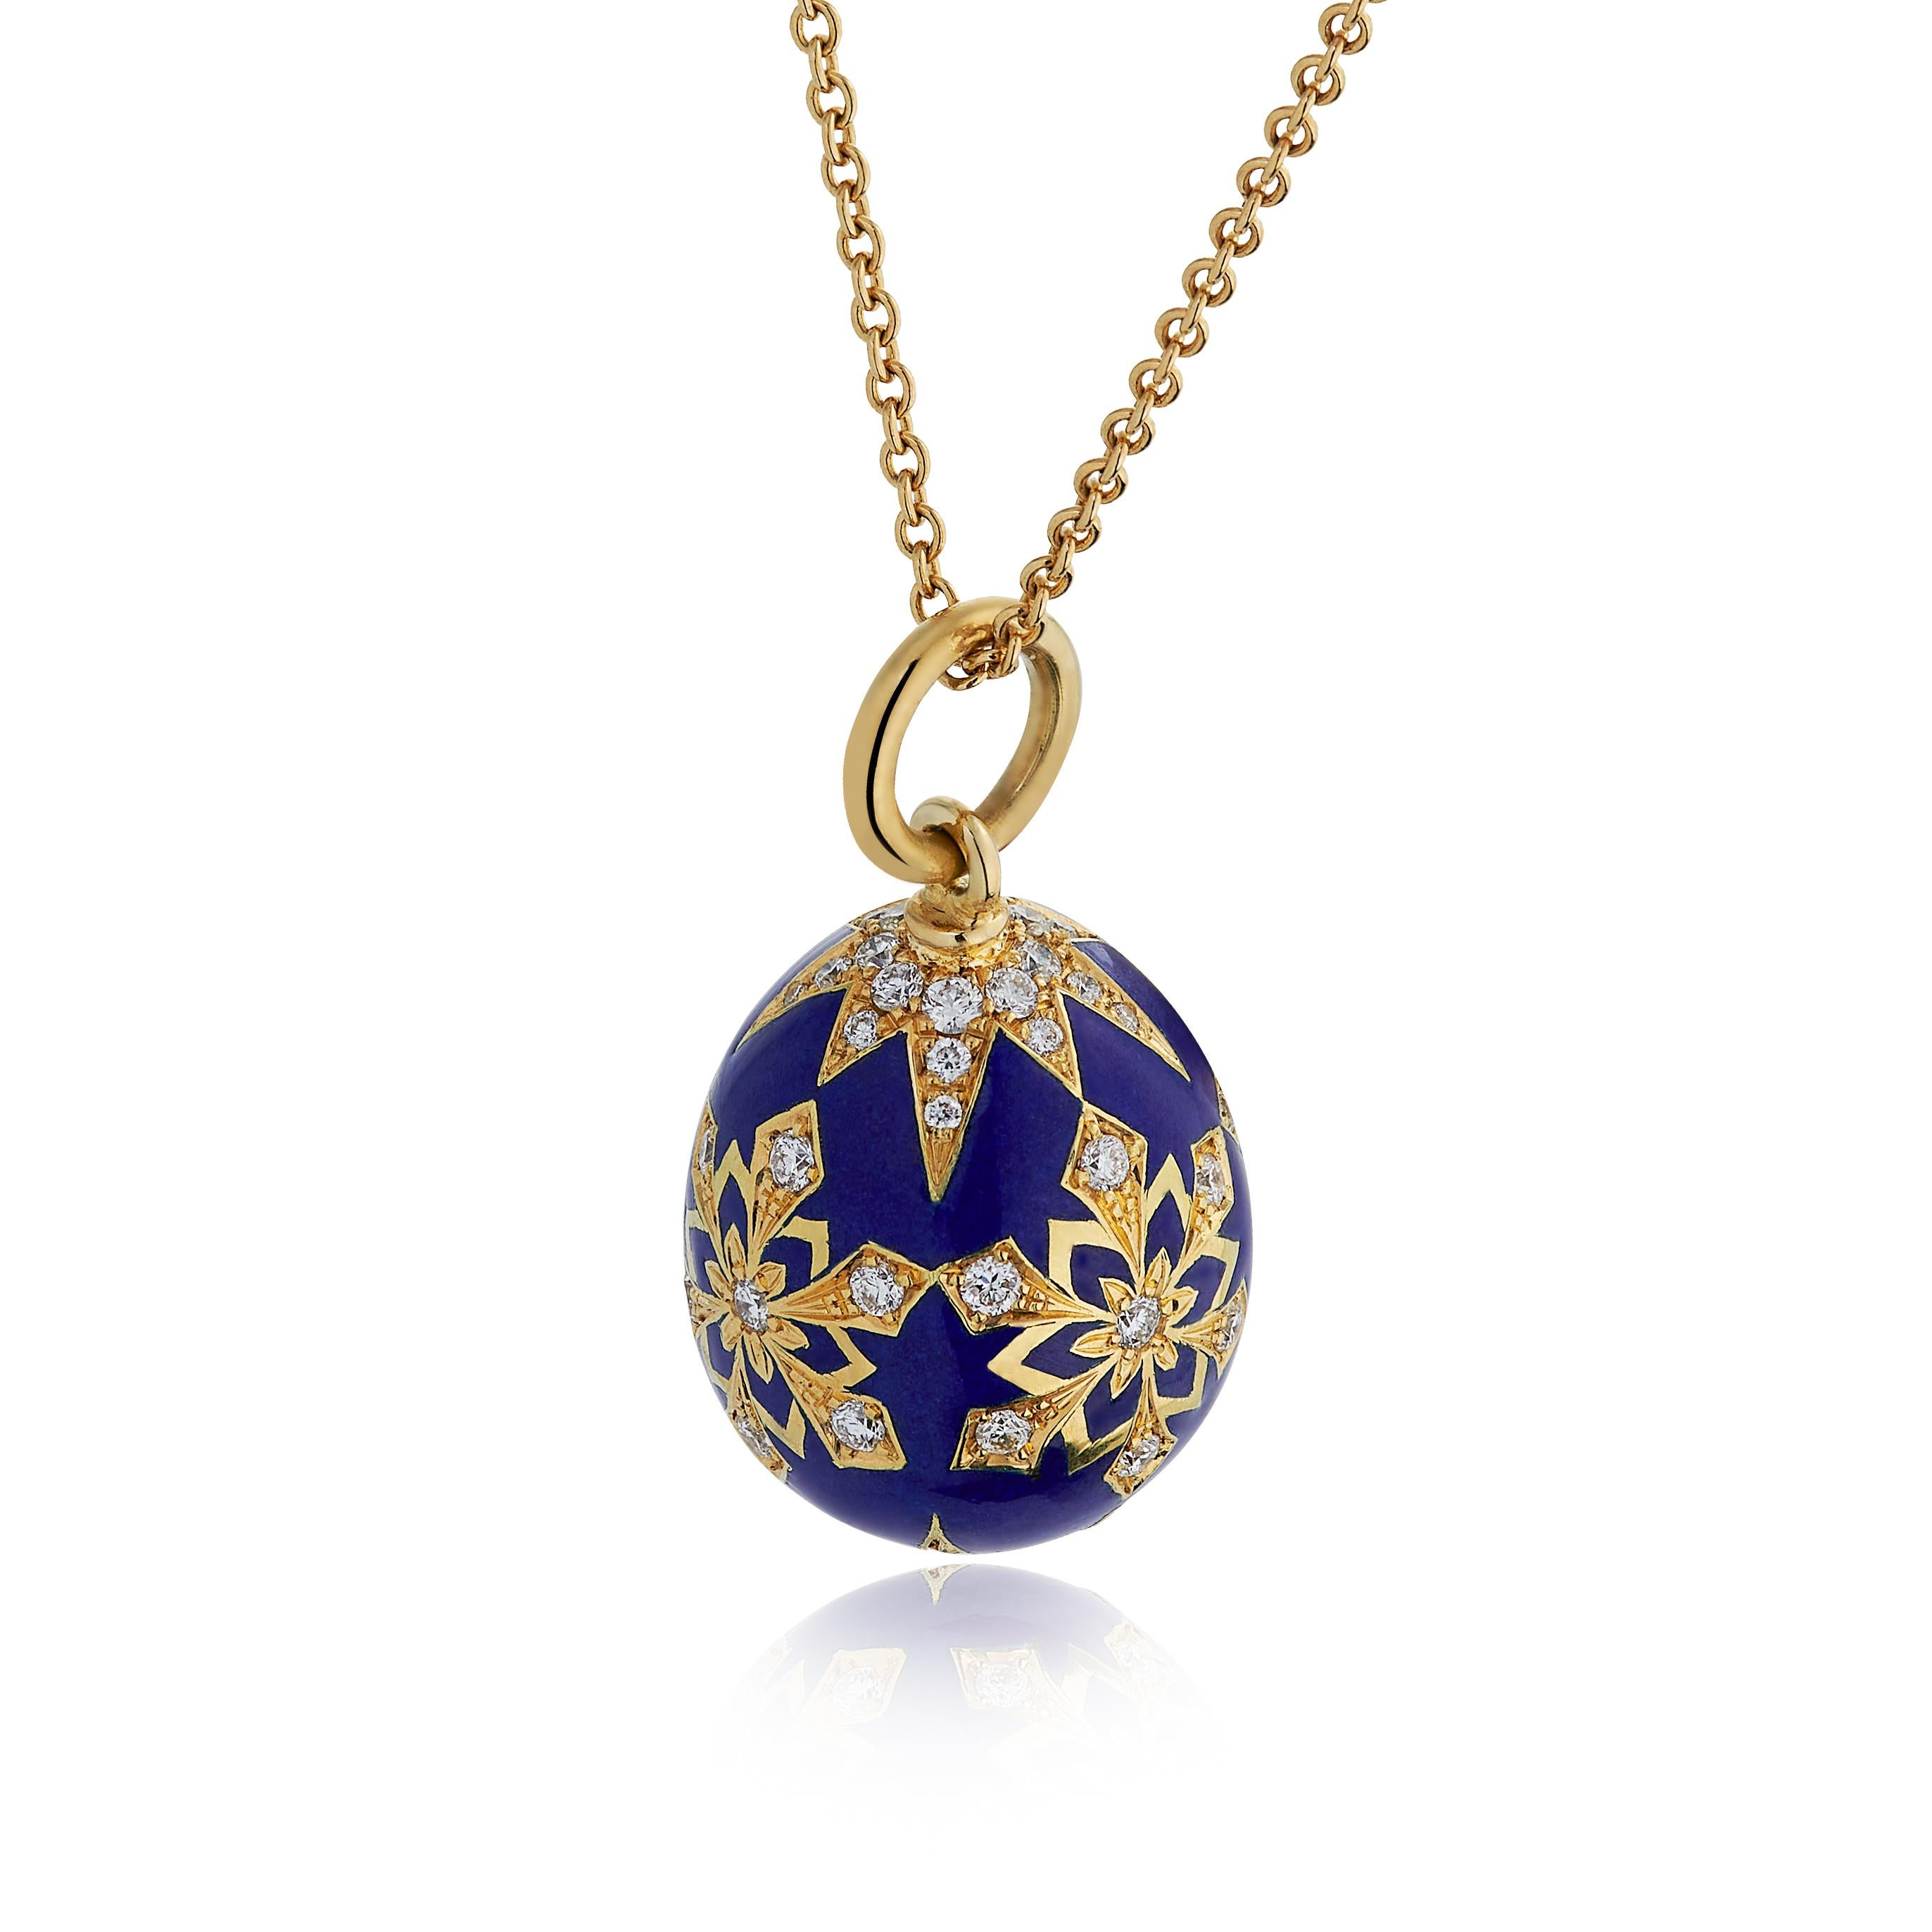 E Wolfe & Company 18 carat Yellow Gold Enamelled Egg Pendant with Diamond-set detail. The Egg has been vitreous enamelled in a rich royal blue colour to surround the snowflake and star detail which has then been diamond-set. The round brilliant cut